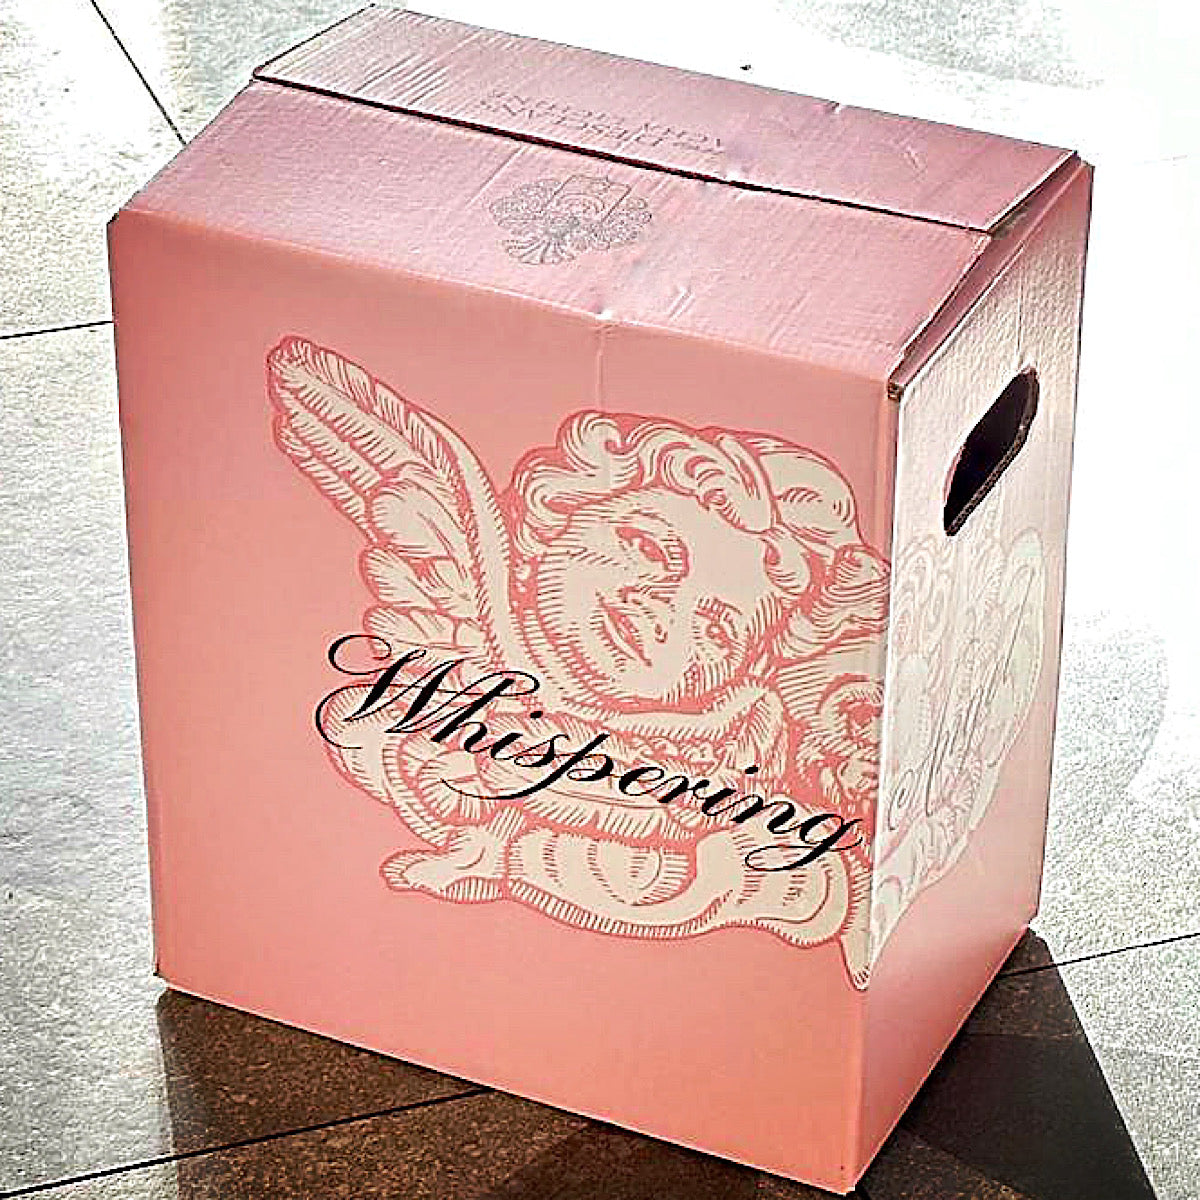 Whispering Angel Rose Starter Kit Exclusive limited edition